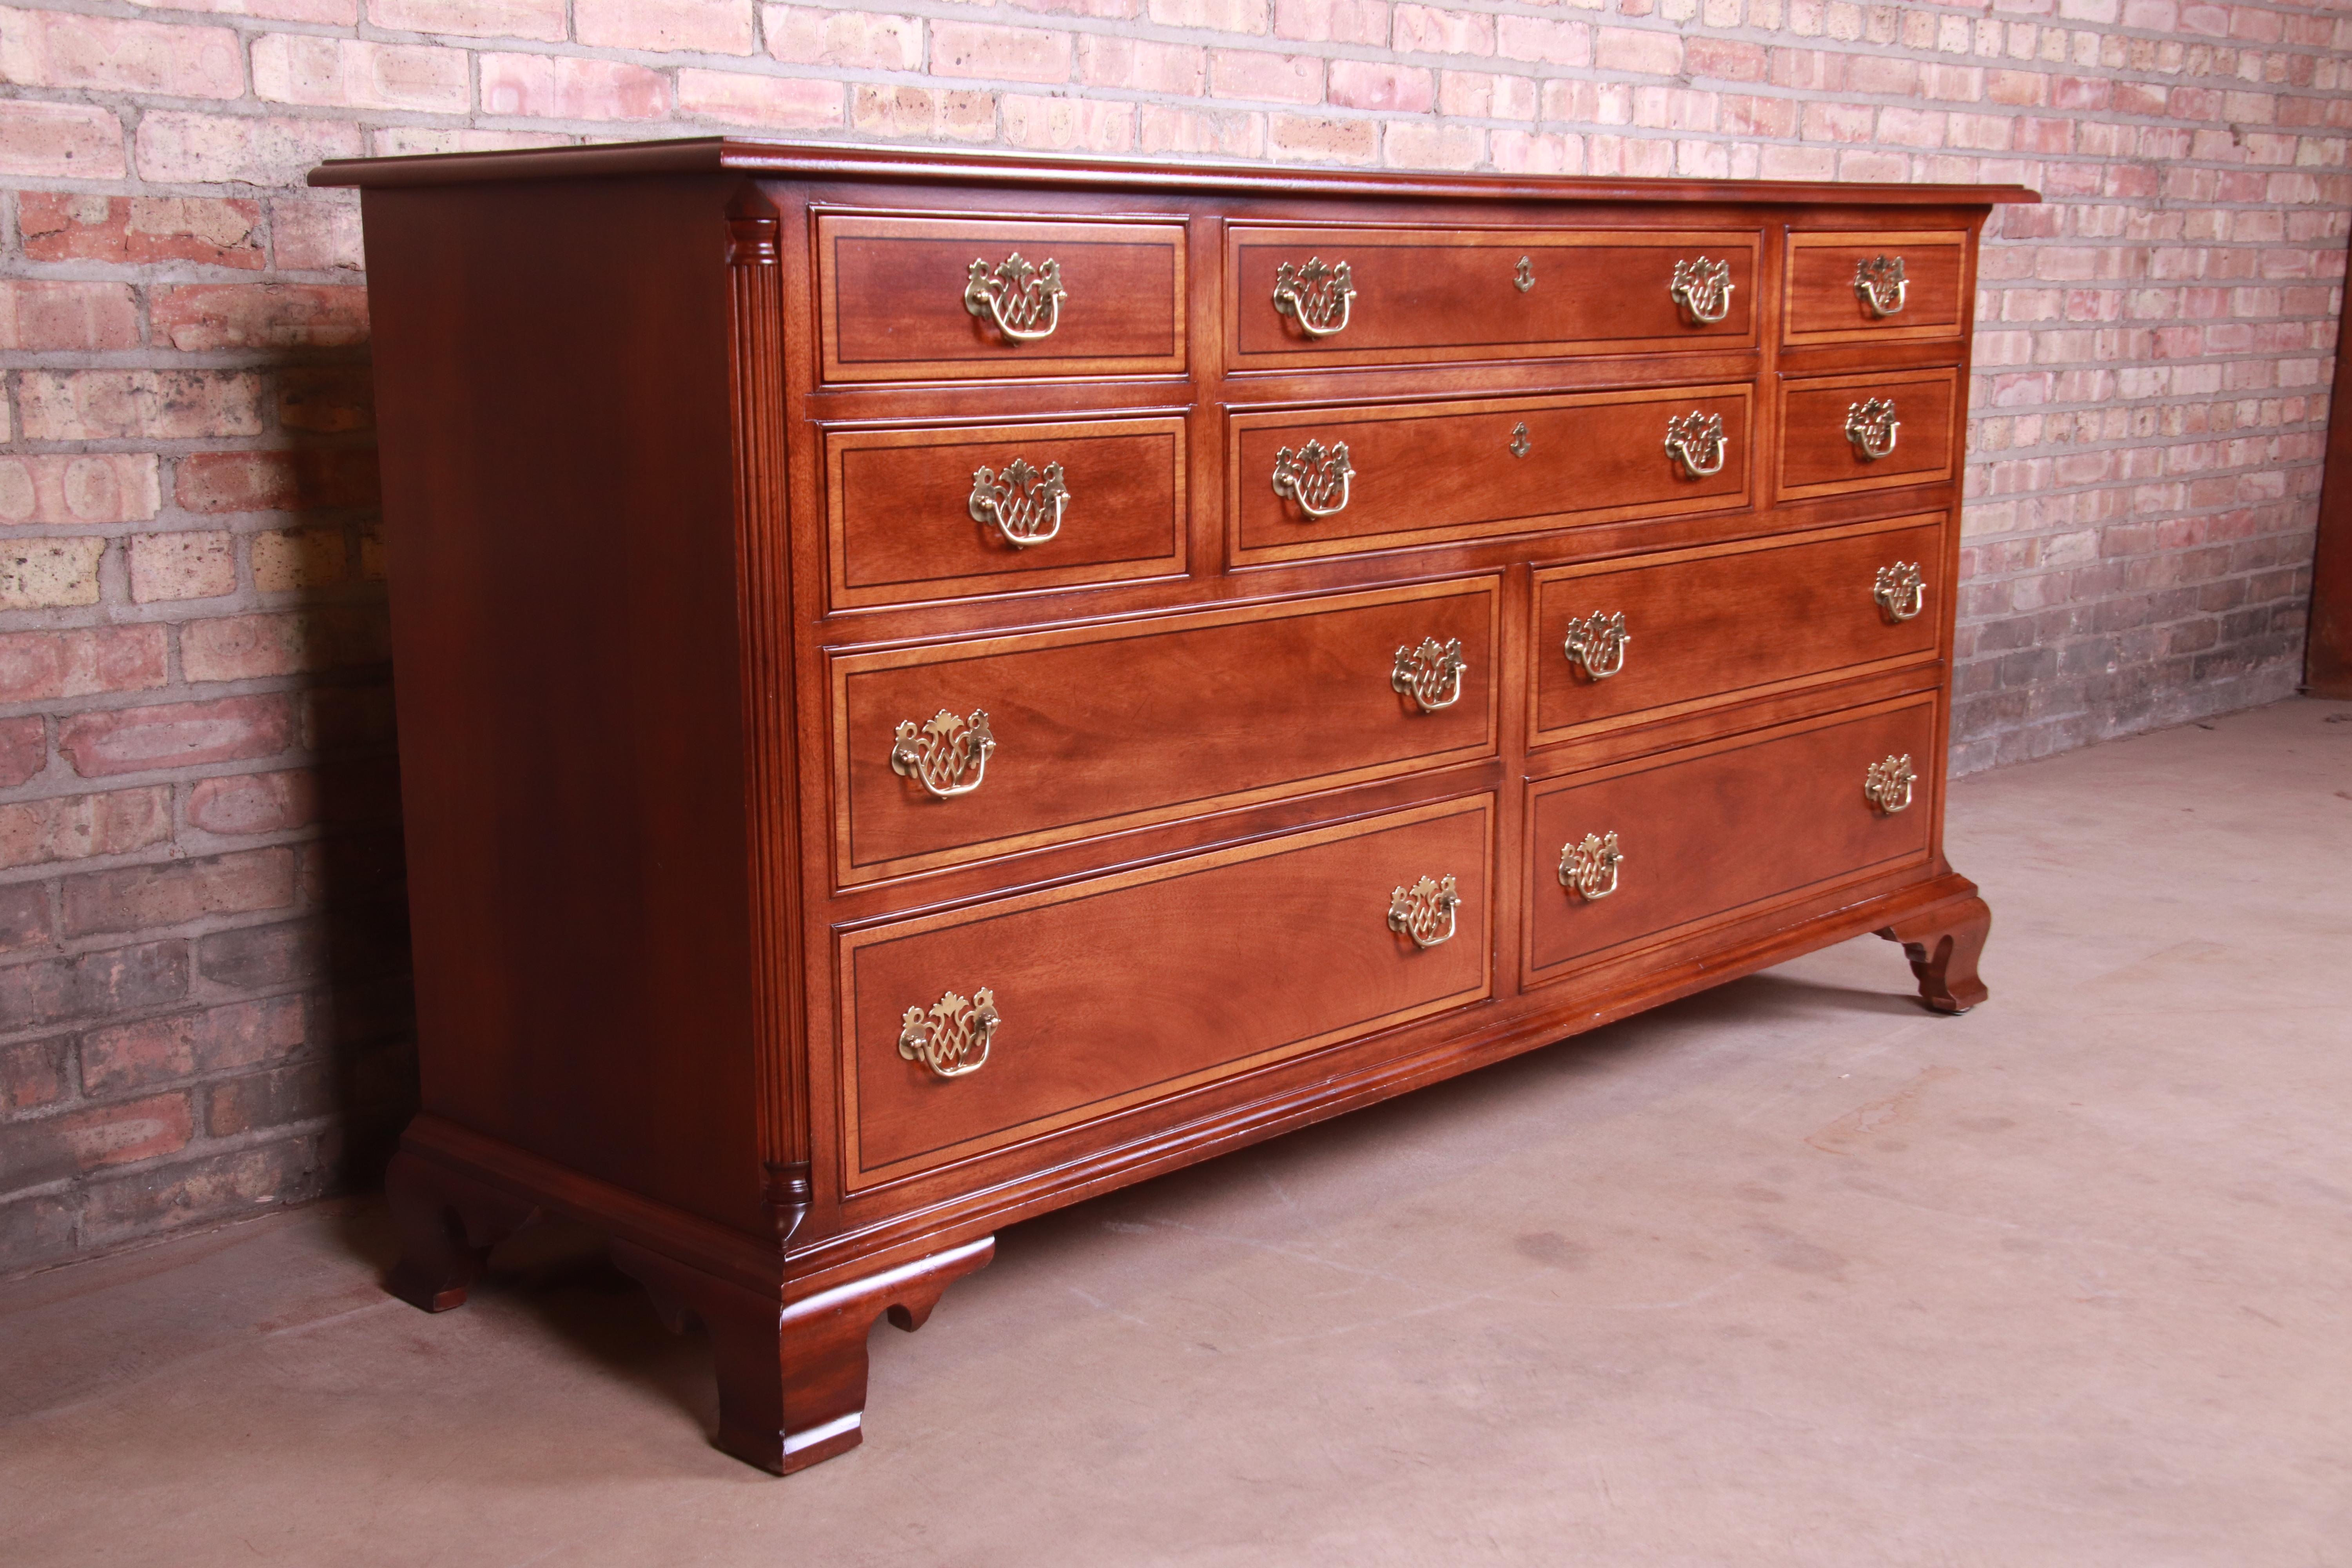 20th Century Stickley Chippendale Mahogany Ten-Drawer Dresser or Credenza, Newly Refinished